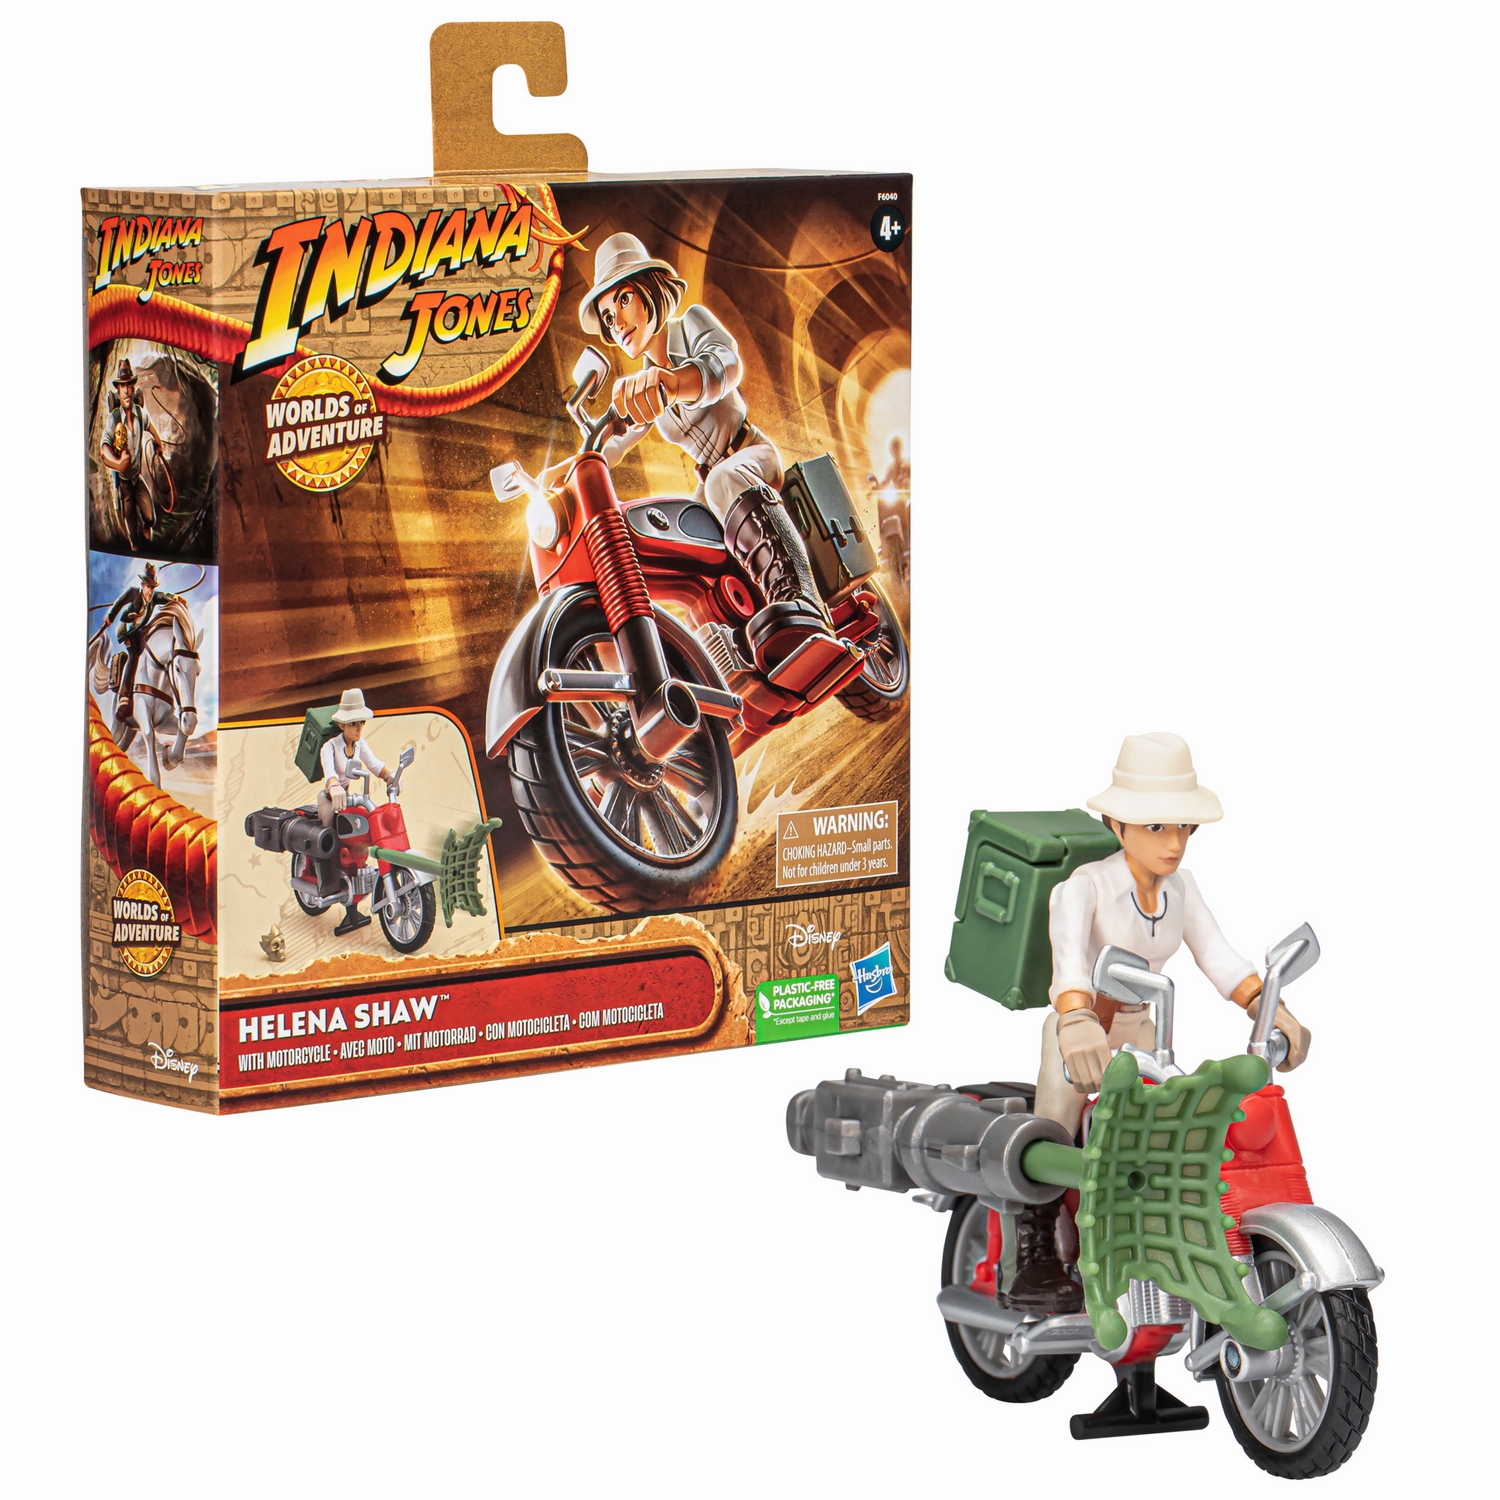 INDIANA JONES WORLDS OF ADVENTURE HELENA SHAW WITH MOTORCYCLE - Package 3.jpg